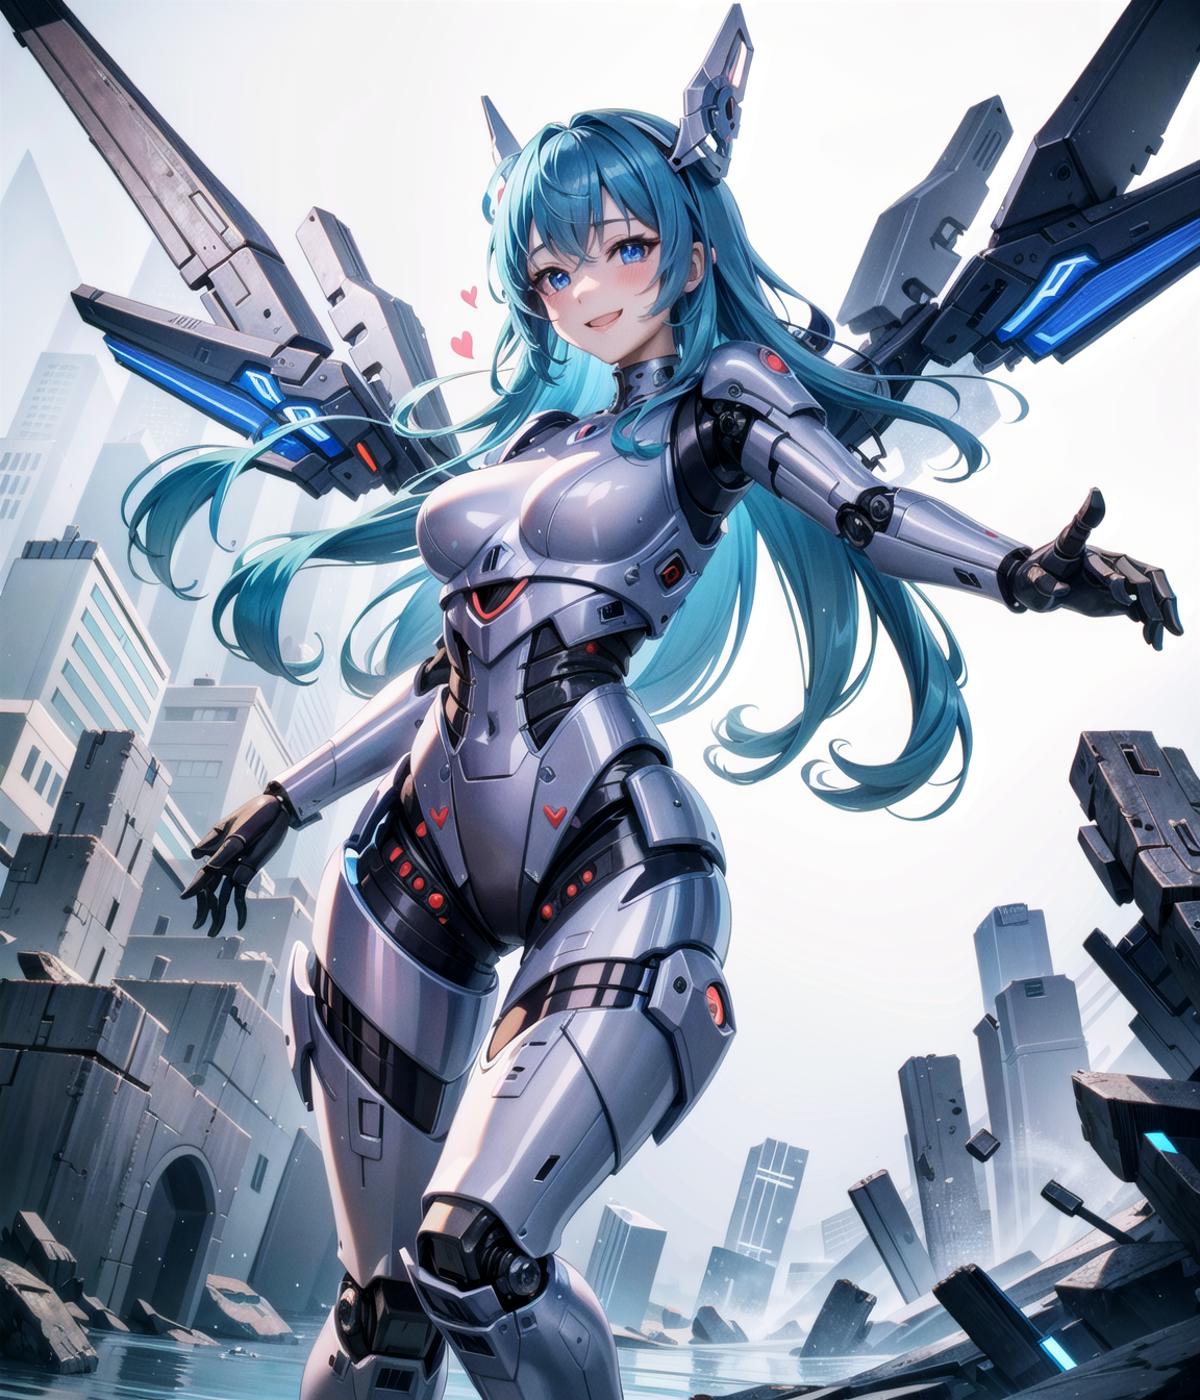 Etude for Robot Girl with Blue Hair(Inspired by 2 Character) image by Ashimori